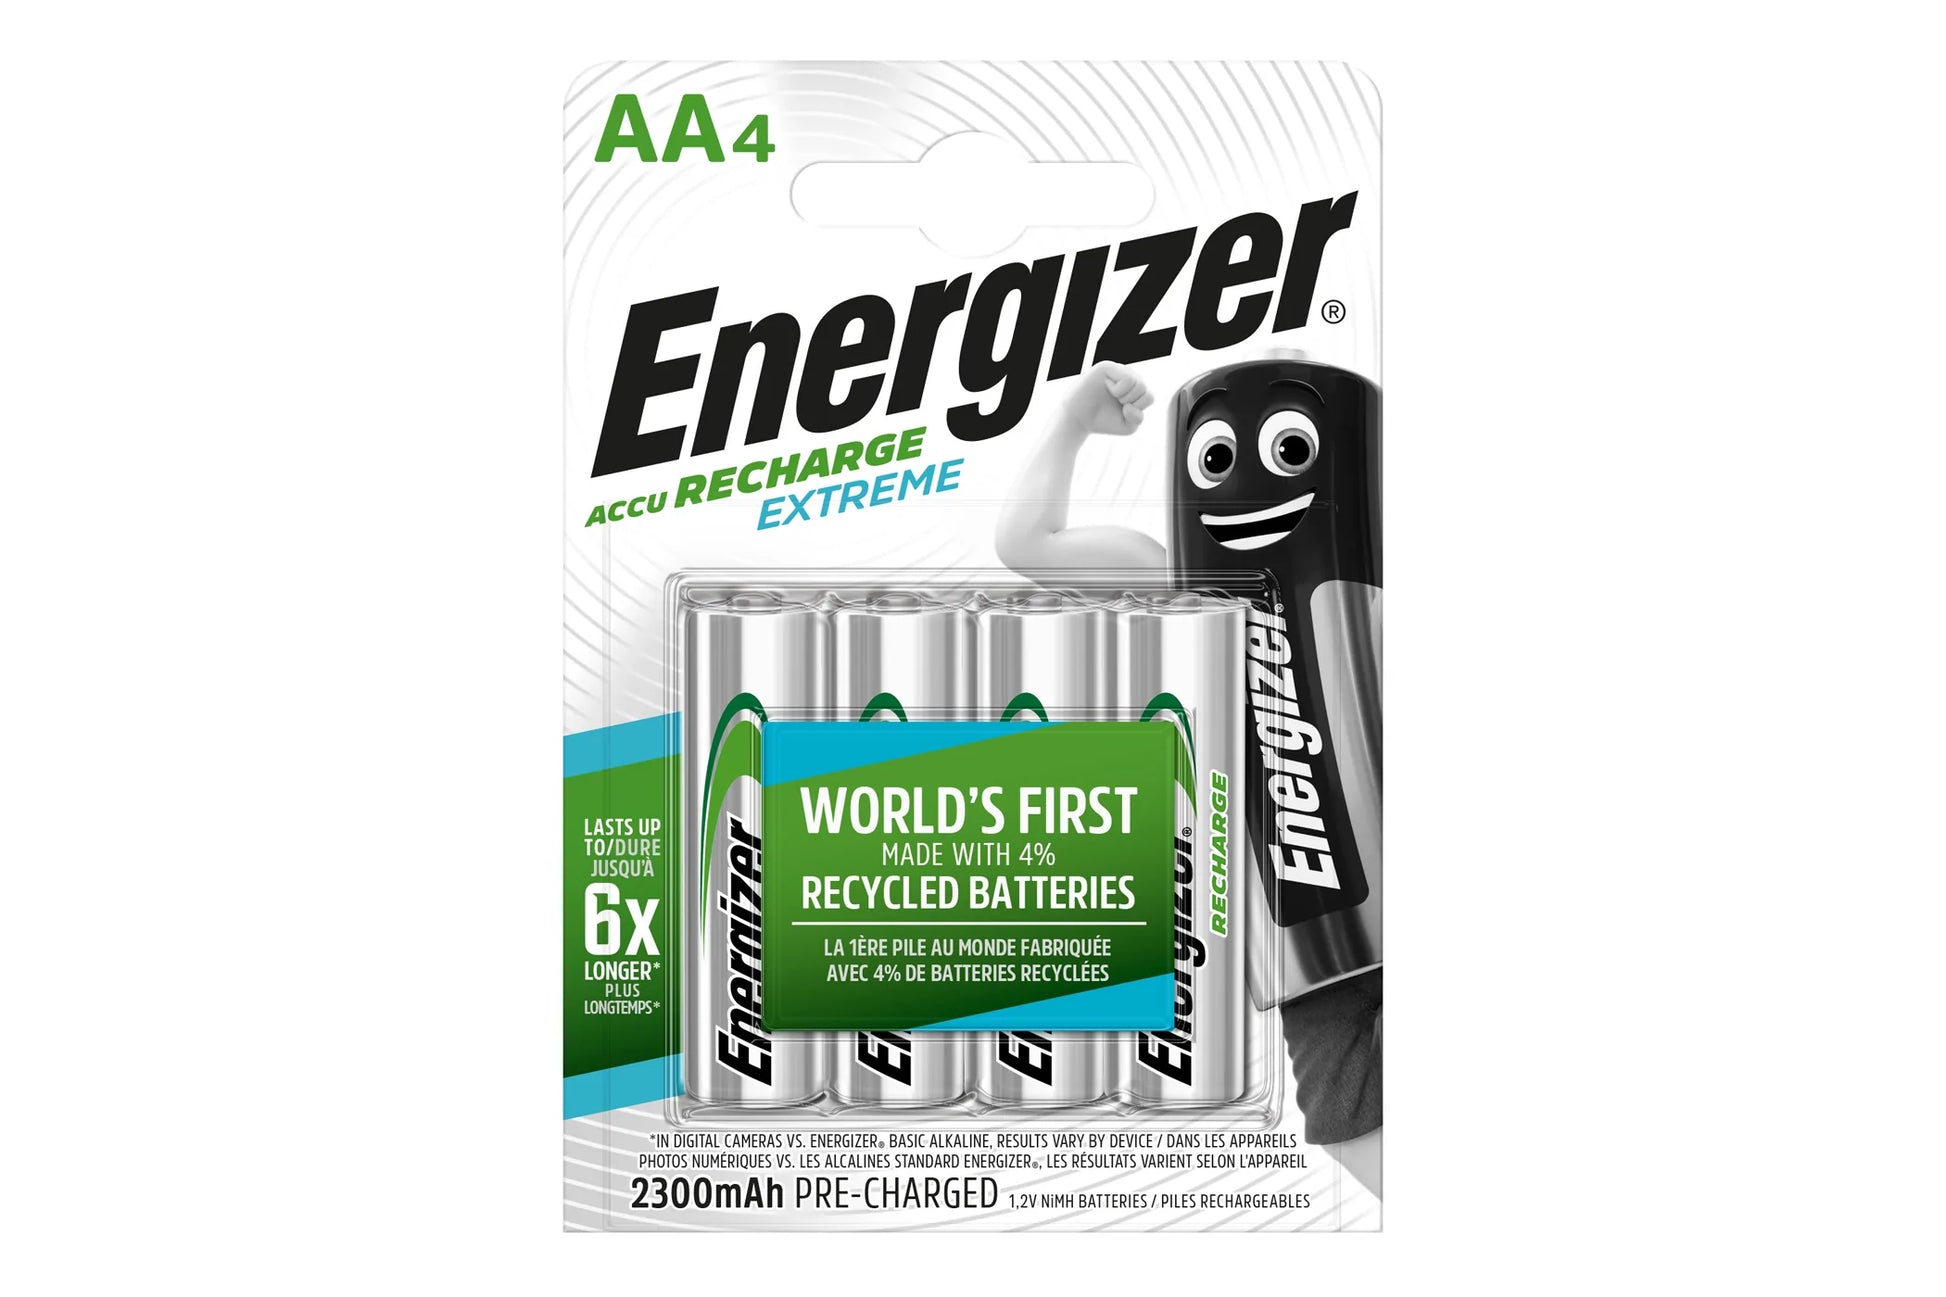 Energizer AA 2300mAh Recharge Extreme NiMH Rechargeable Batteries - Pack of 4 - maplin.co.uk